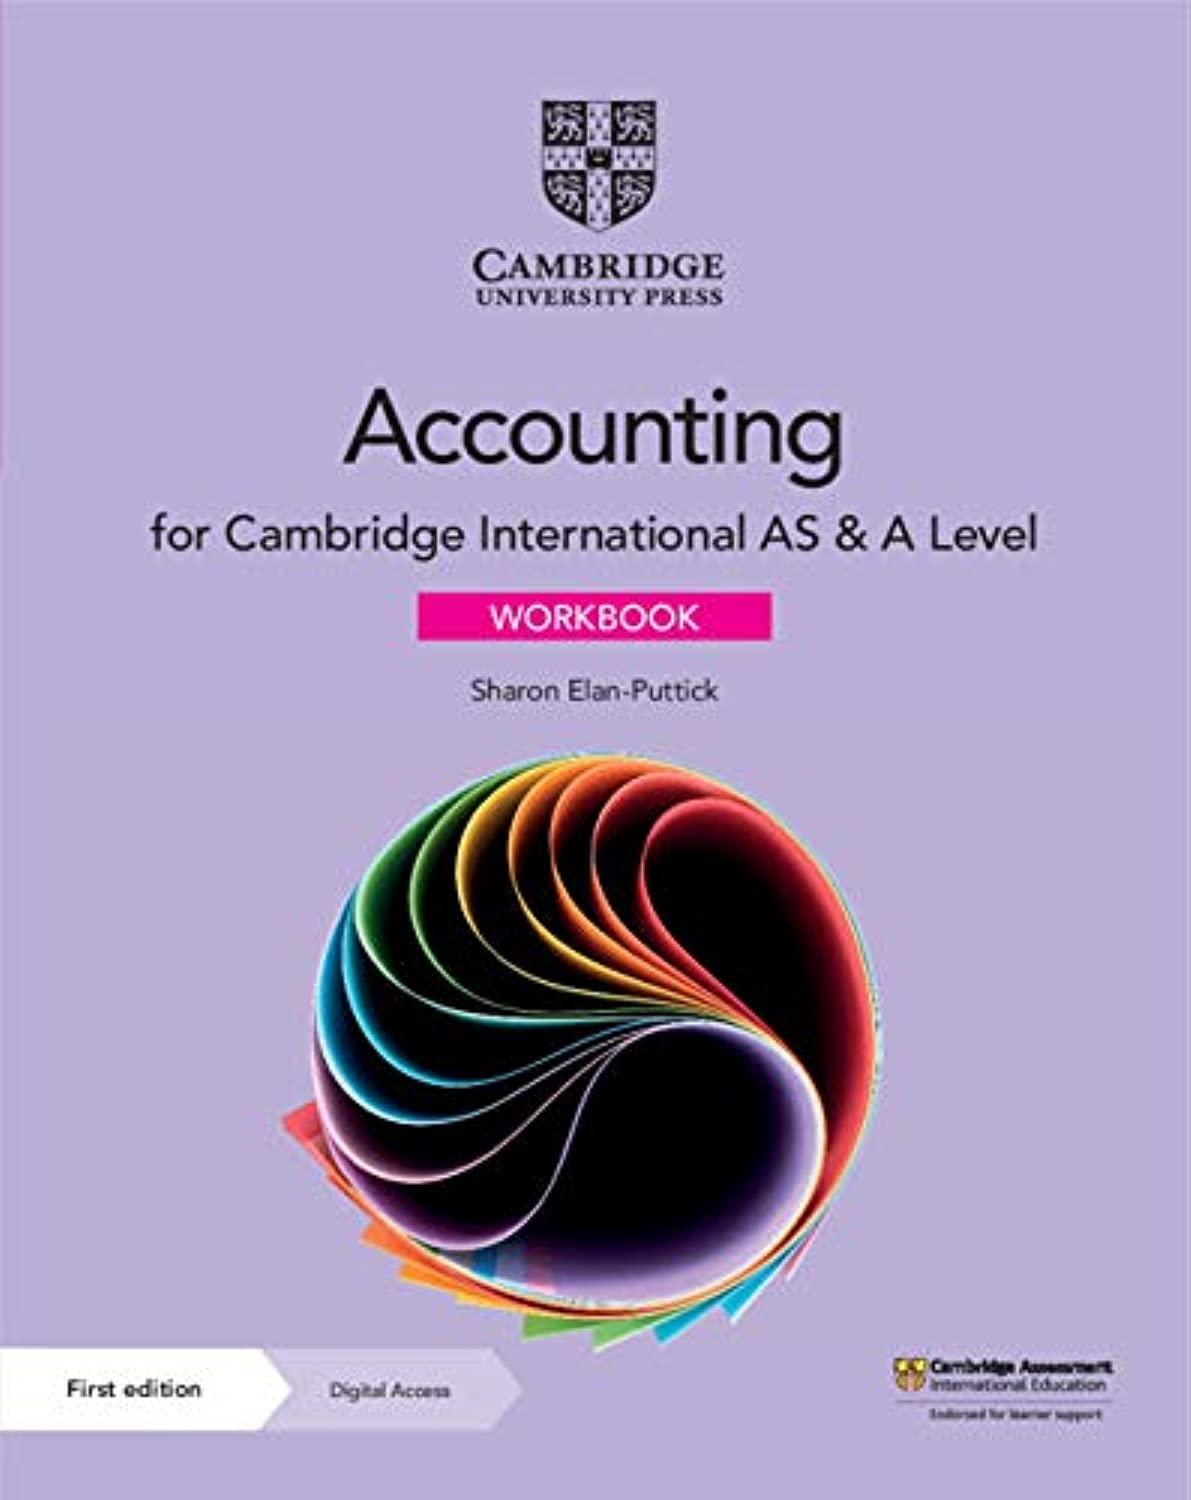 cambridge international as and a level accounting workbook 1st edition sharon elan-puttick 110882871x,